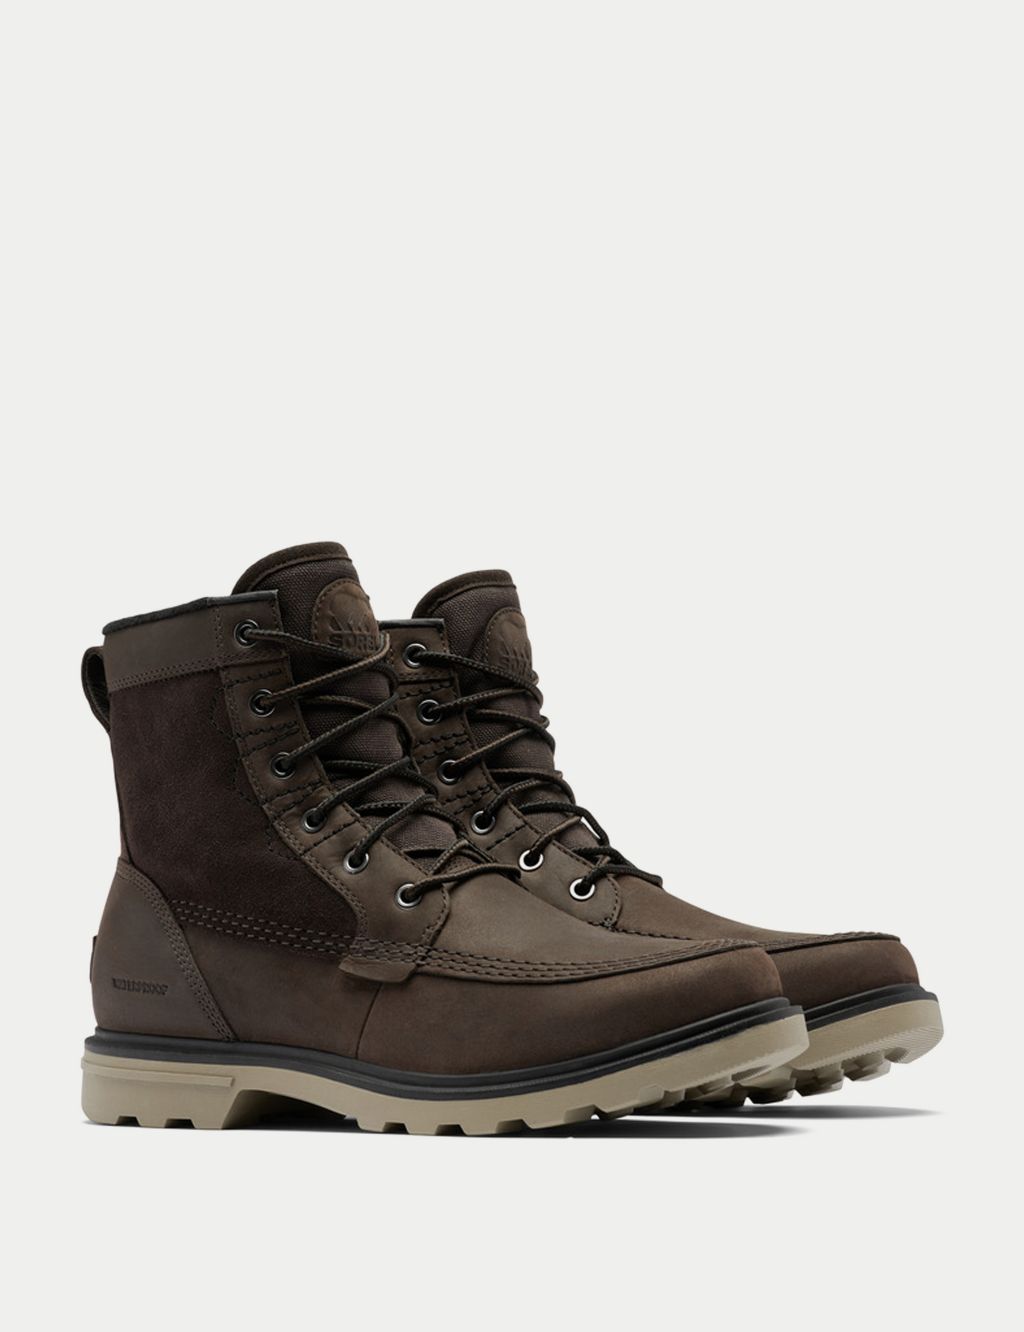 Carson Storm Suede Waterproof Walking Boots image 2